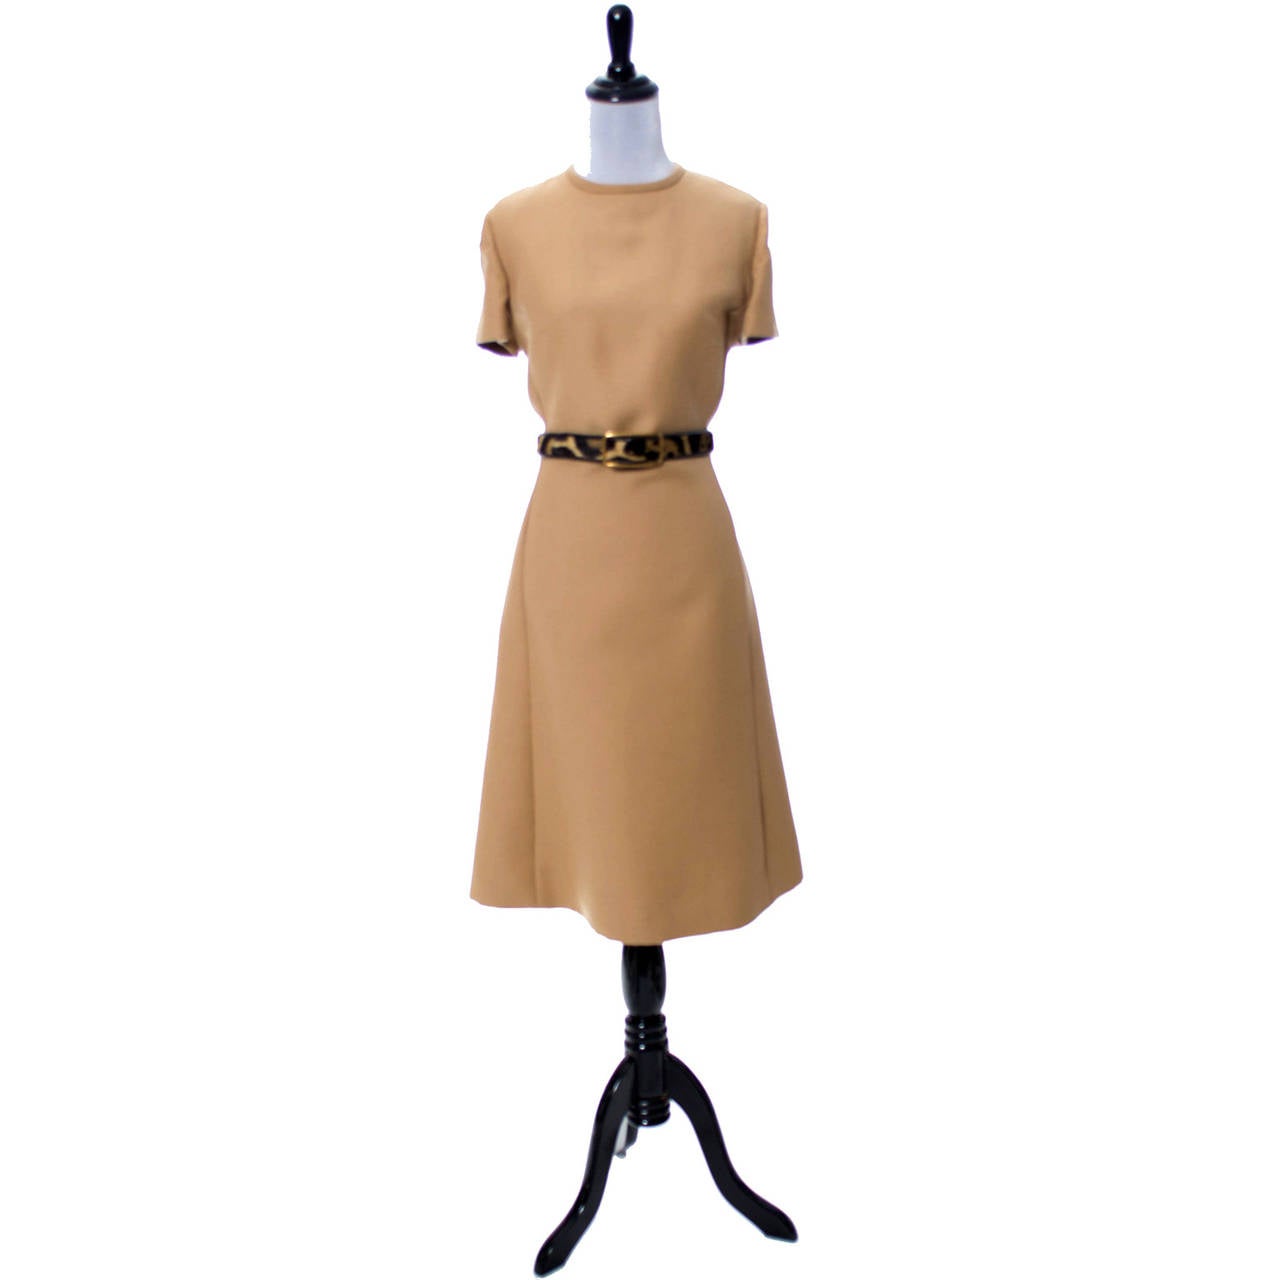 This exceptional vintage dress suit was designed by Gary Keehn and was purchased at Birnbaum's in the 1960's.  The suit includes a simple short sleeved camel colored wool dress with a back zipper and fur trimmed belt, and a short double breasted